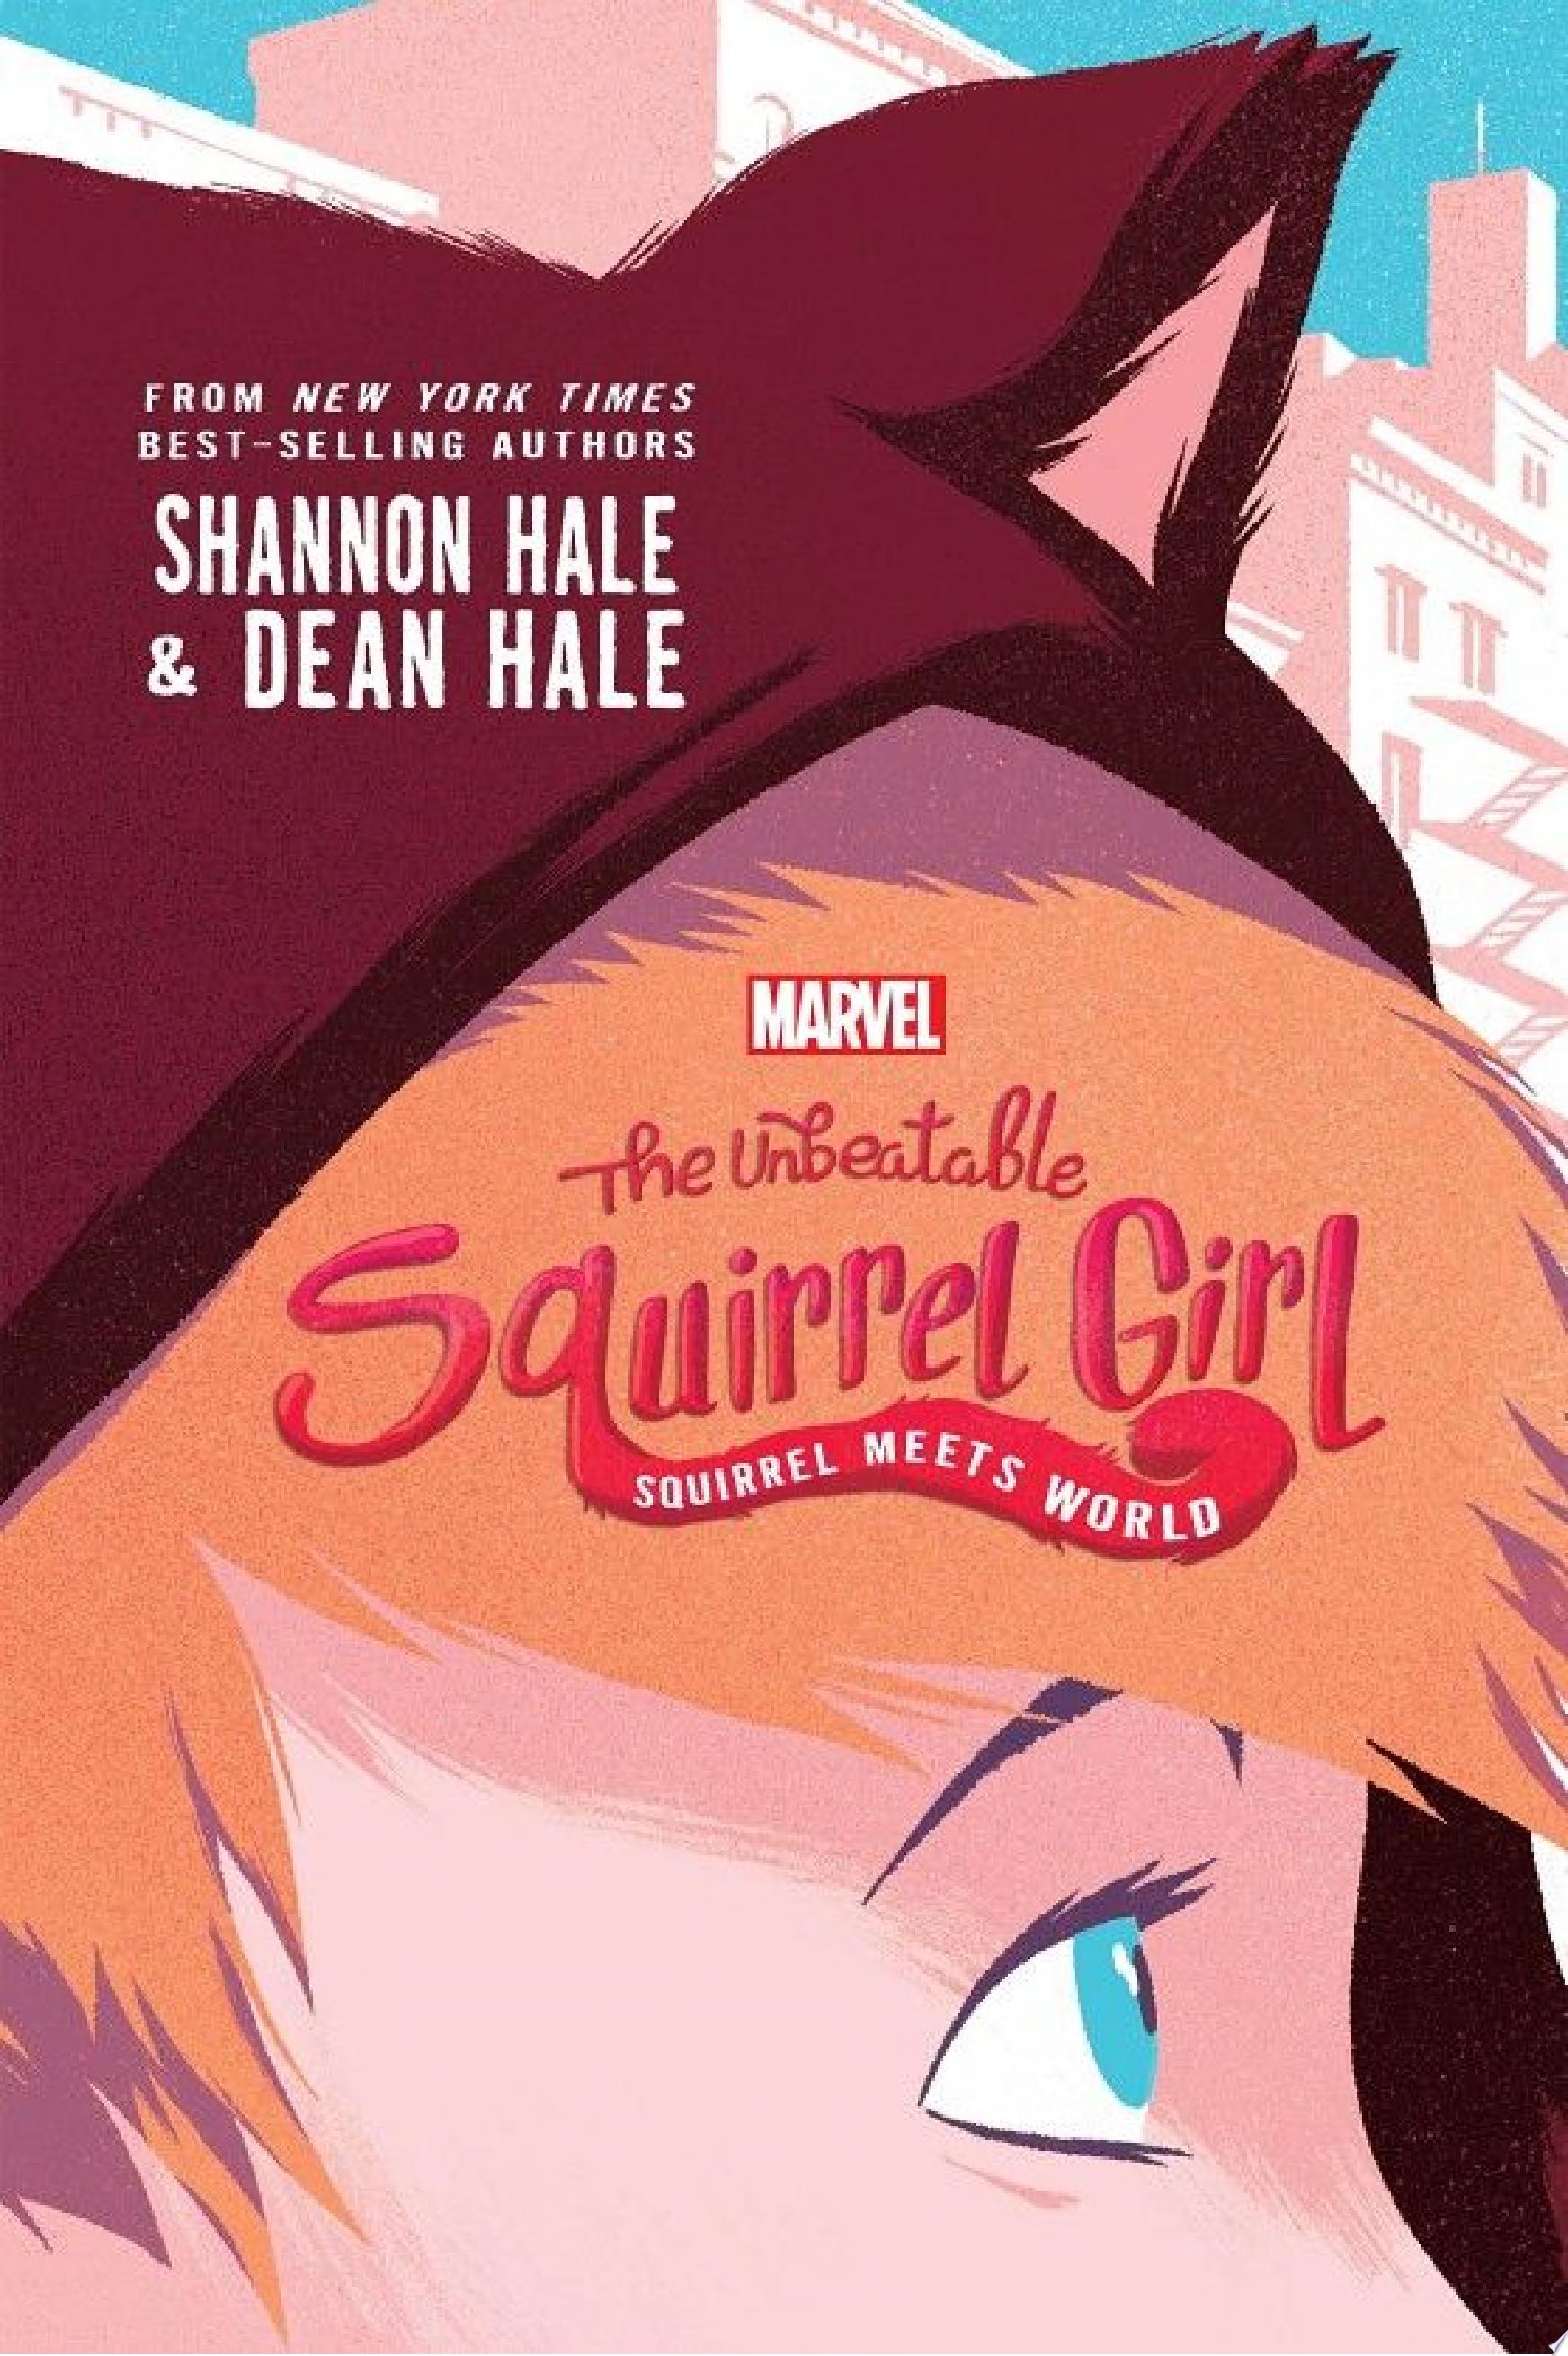 Image for "The Unbeatable Squirrel Girl: Squirrel Meets World"